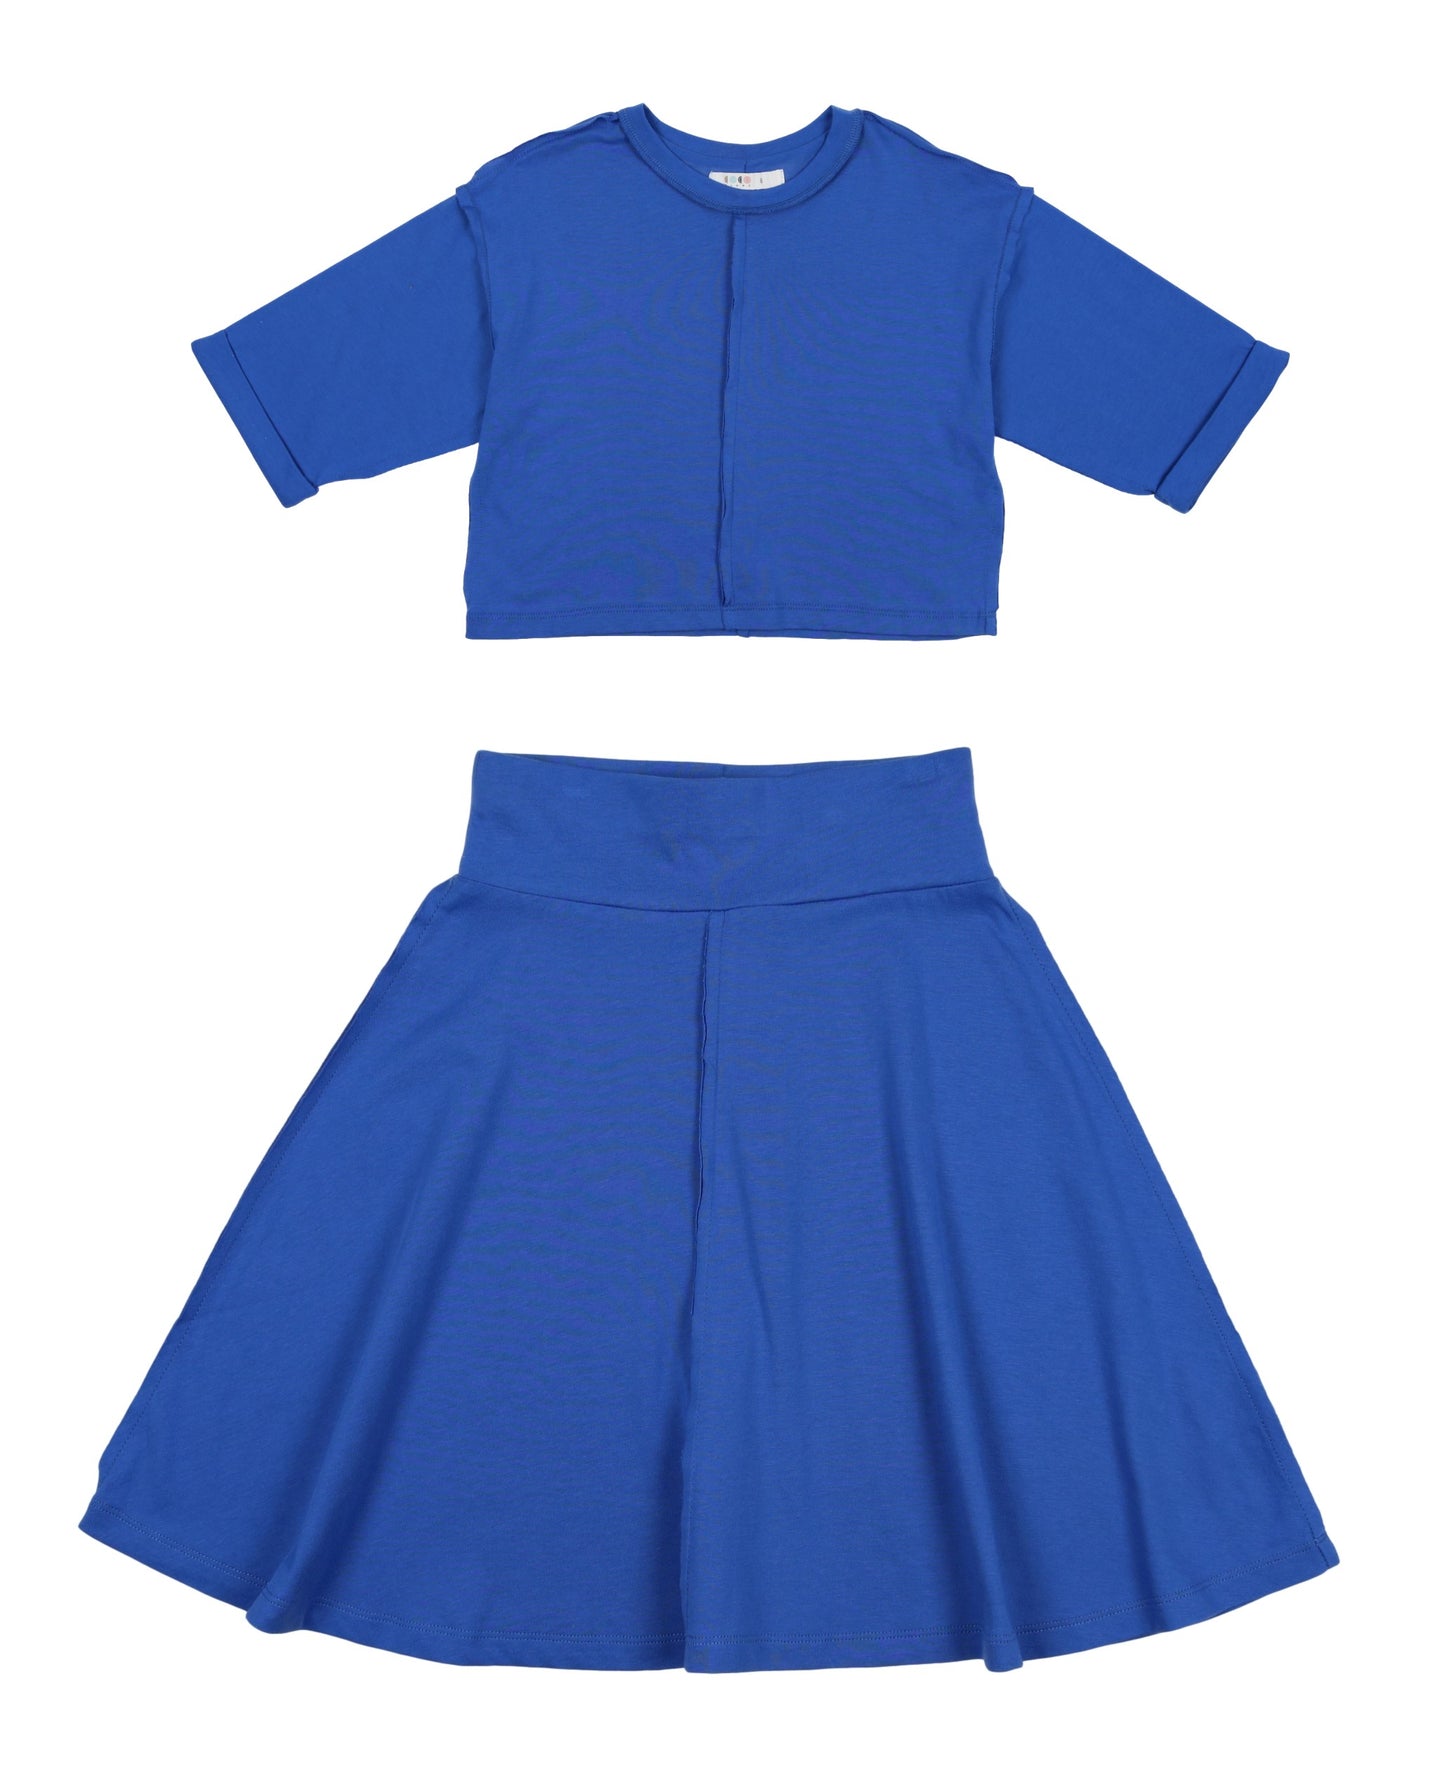 Coco Blanc Girls Top & Circle Skirt Outfit Set